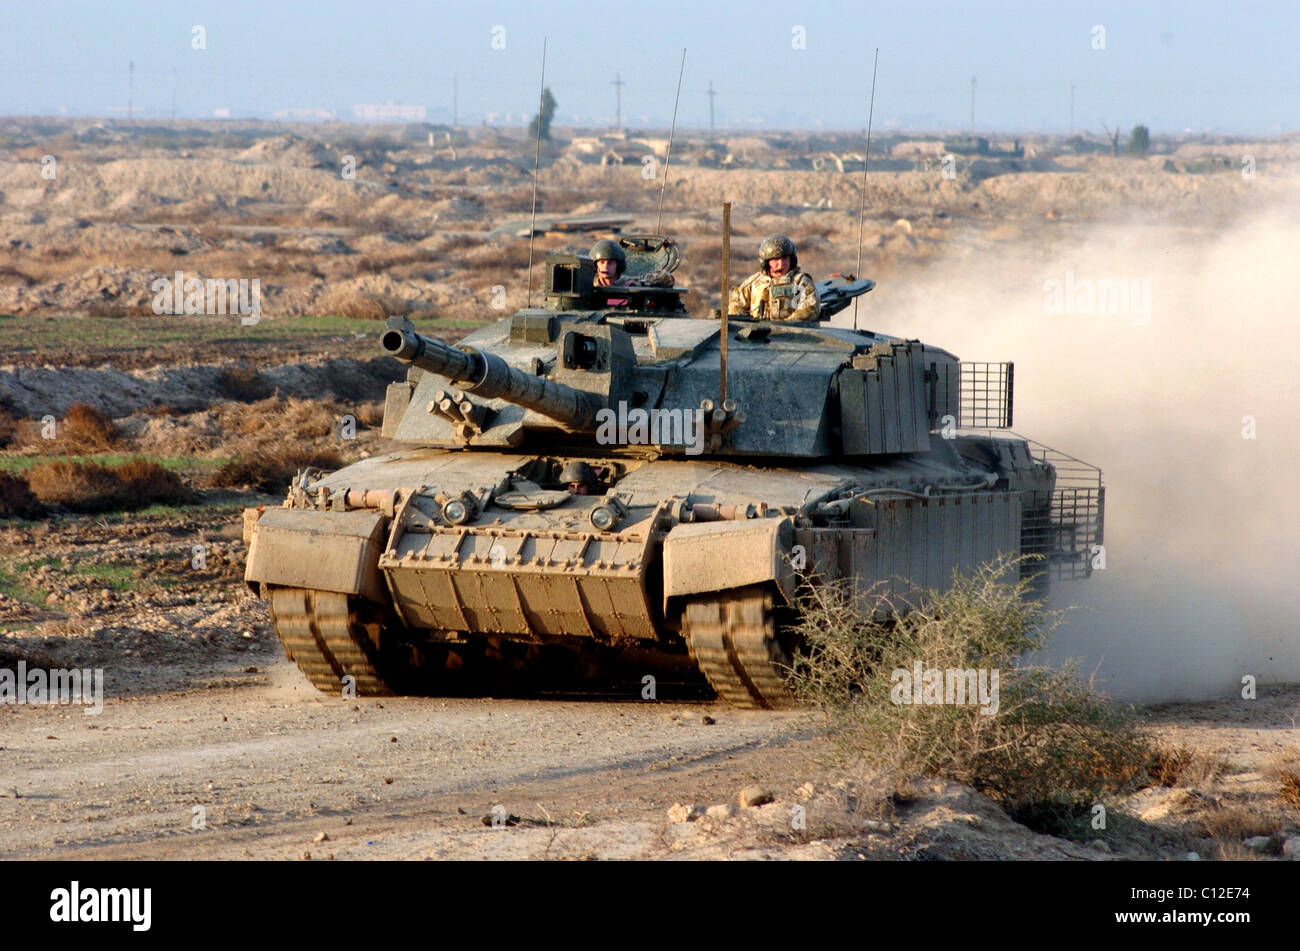 FV4034 Challenger 2 is a main battle tank (MBT) currently in service with the armies of the United Kingdom and Oman. Stock Photo